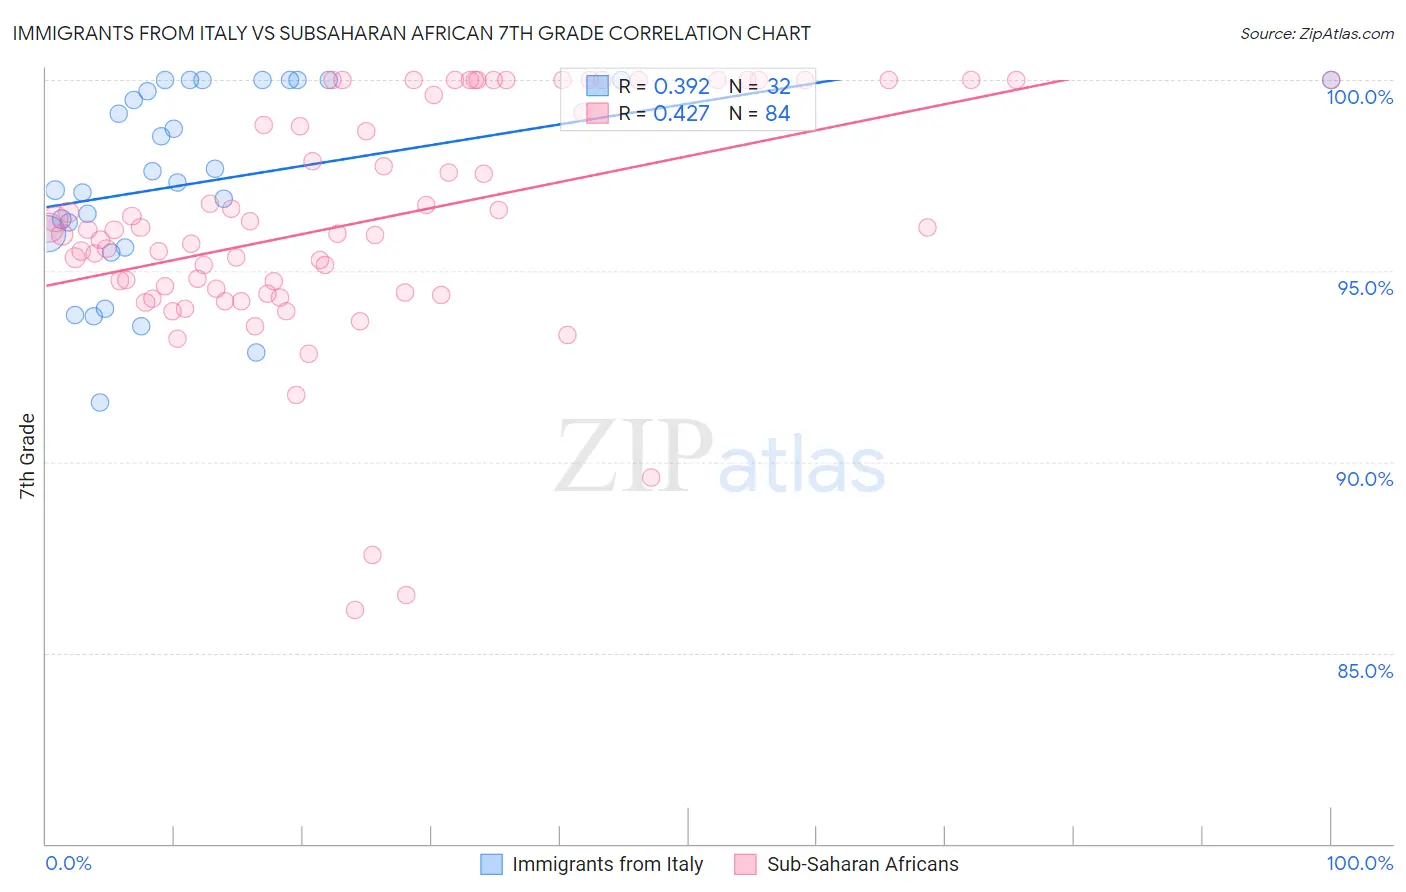 Immigrants from Italy vs Subsaharan African 7th Grade